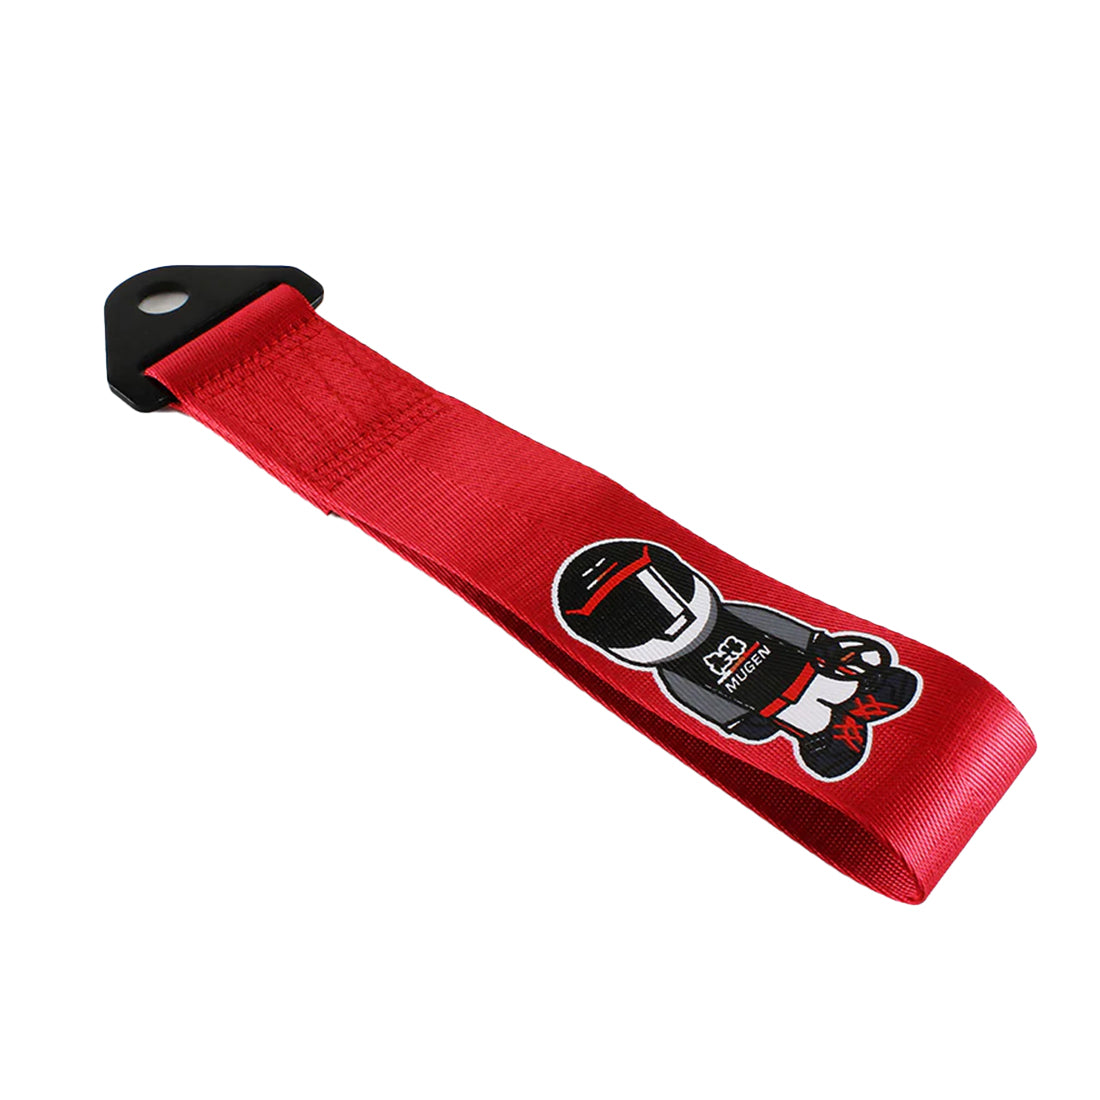 Mugen Power Tow Strap V2 in red.